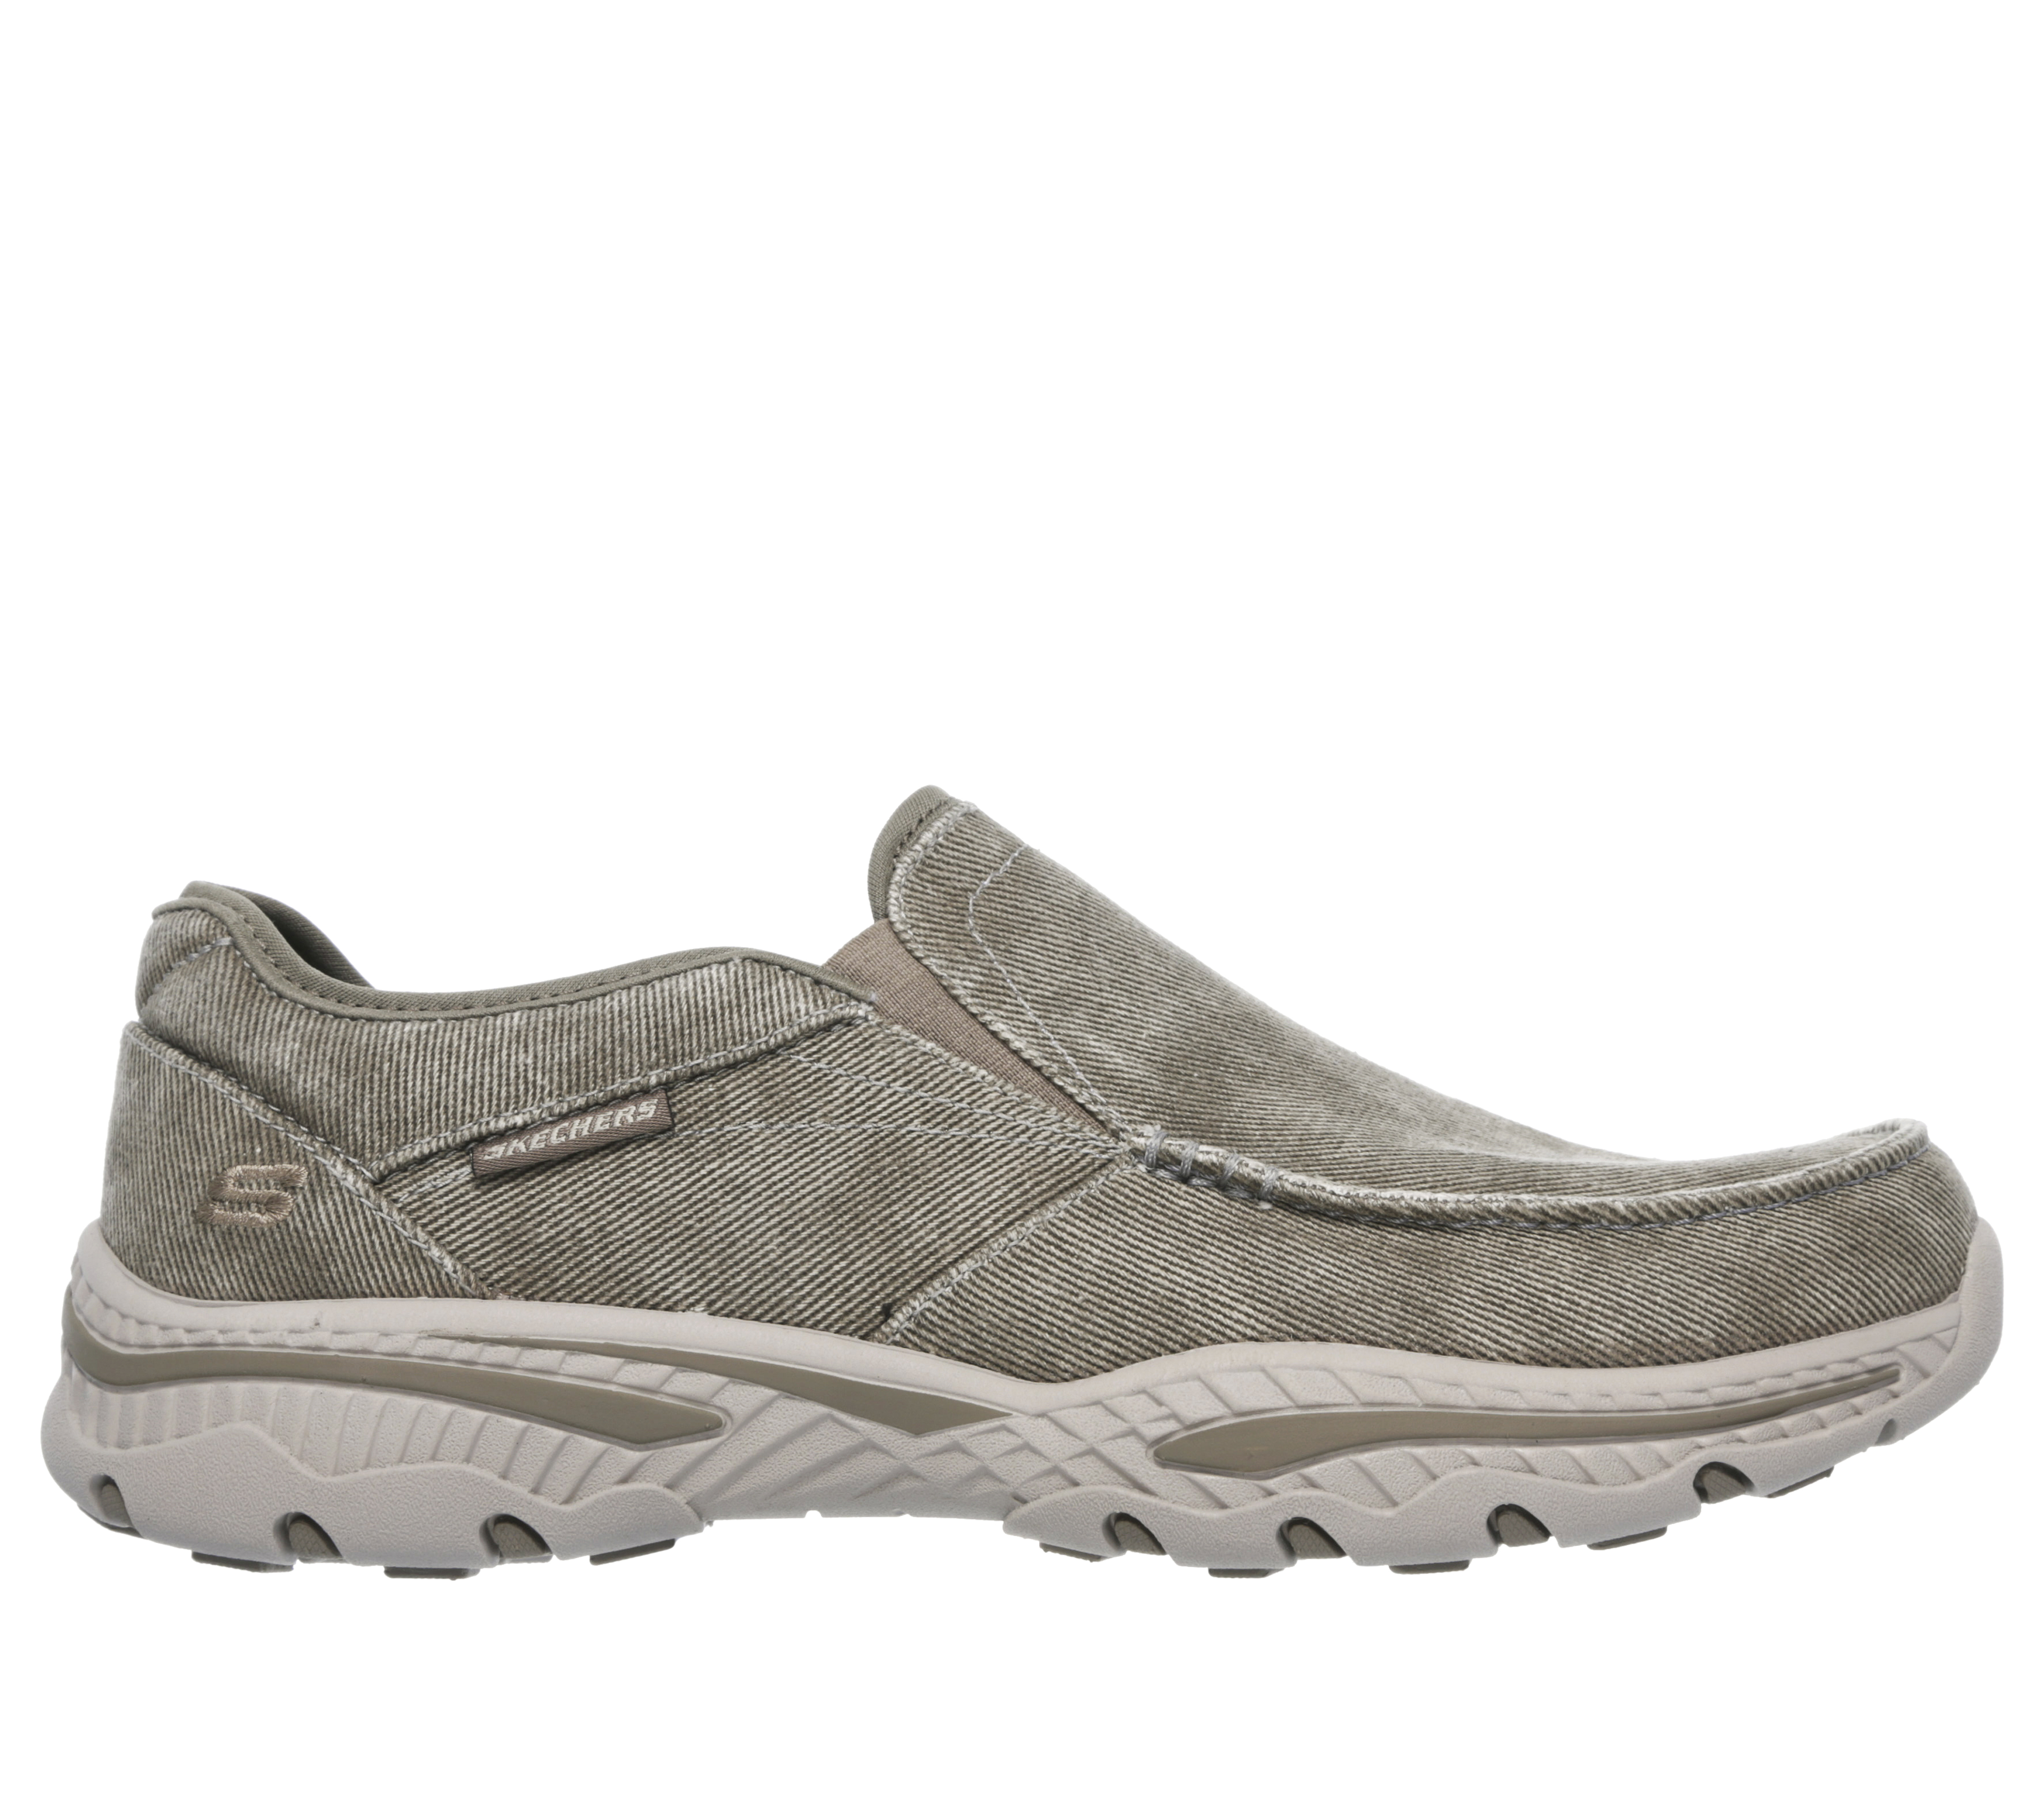 What is Skechers Relaxed Fit?